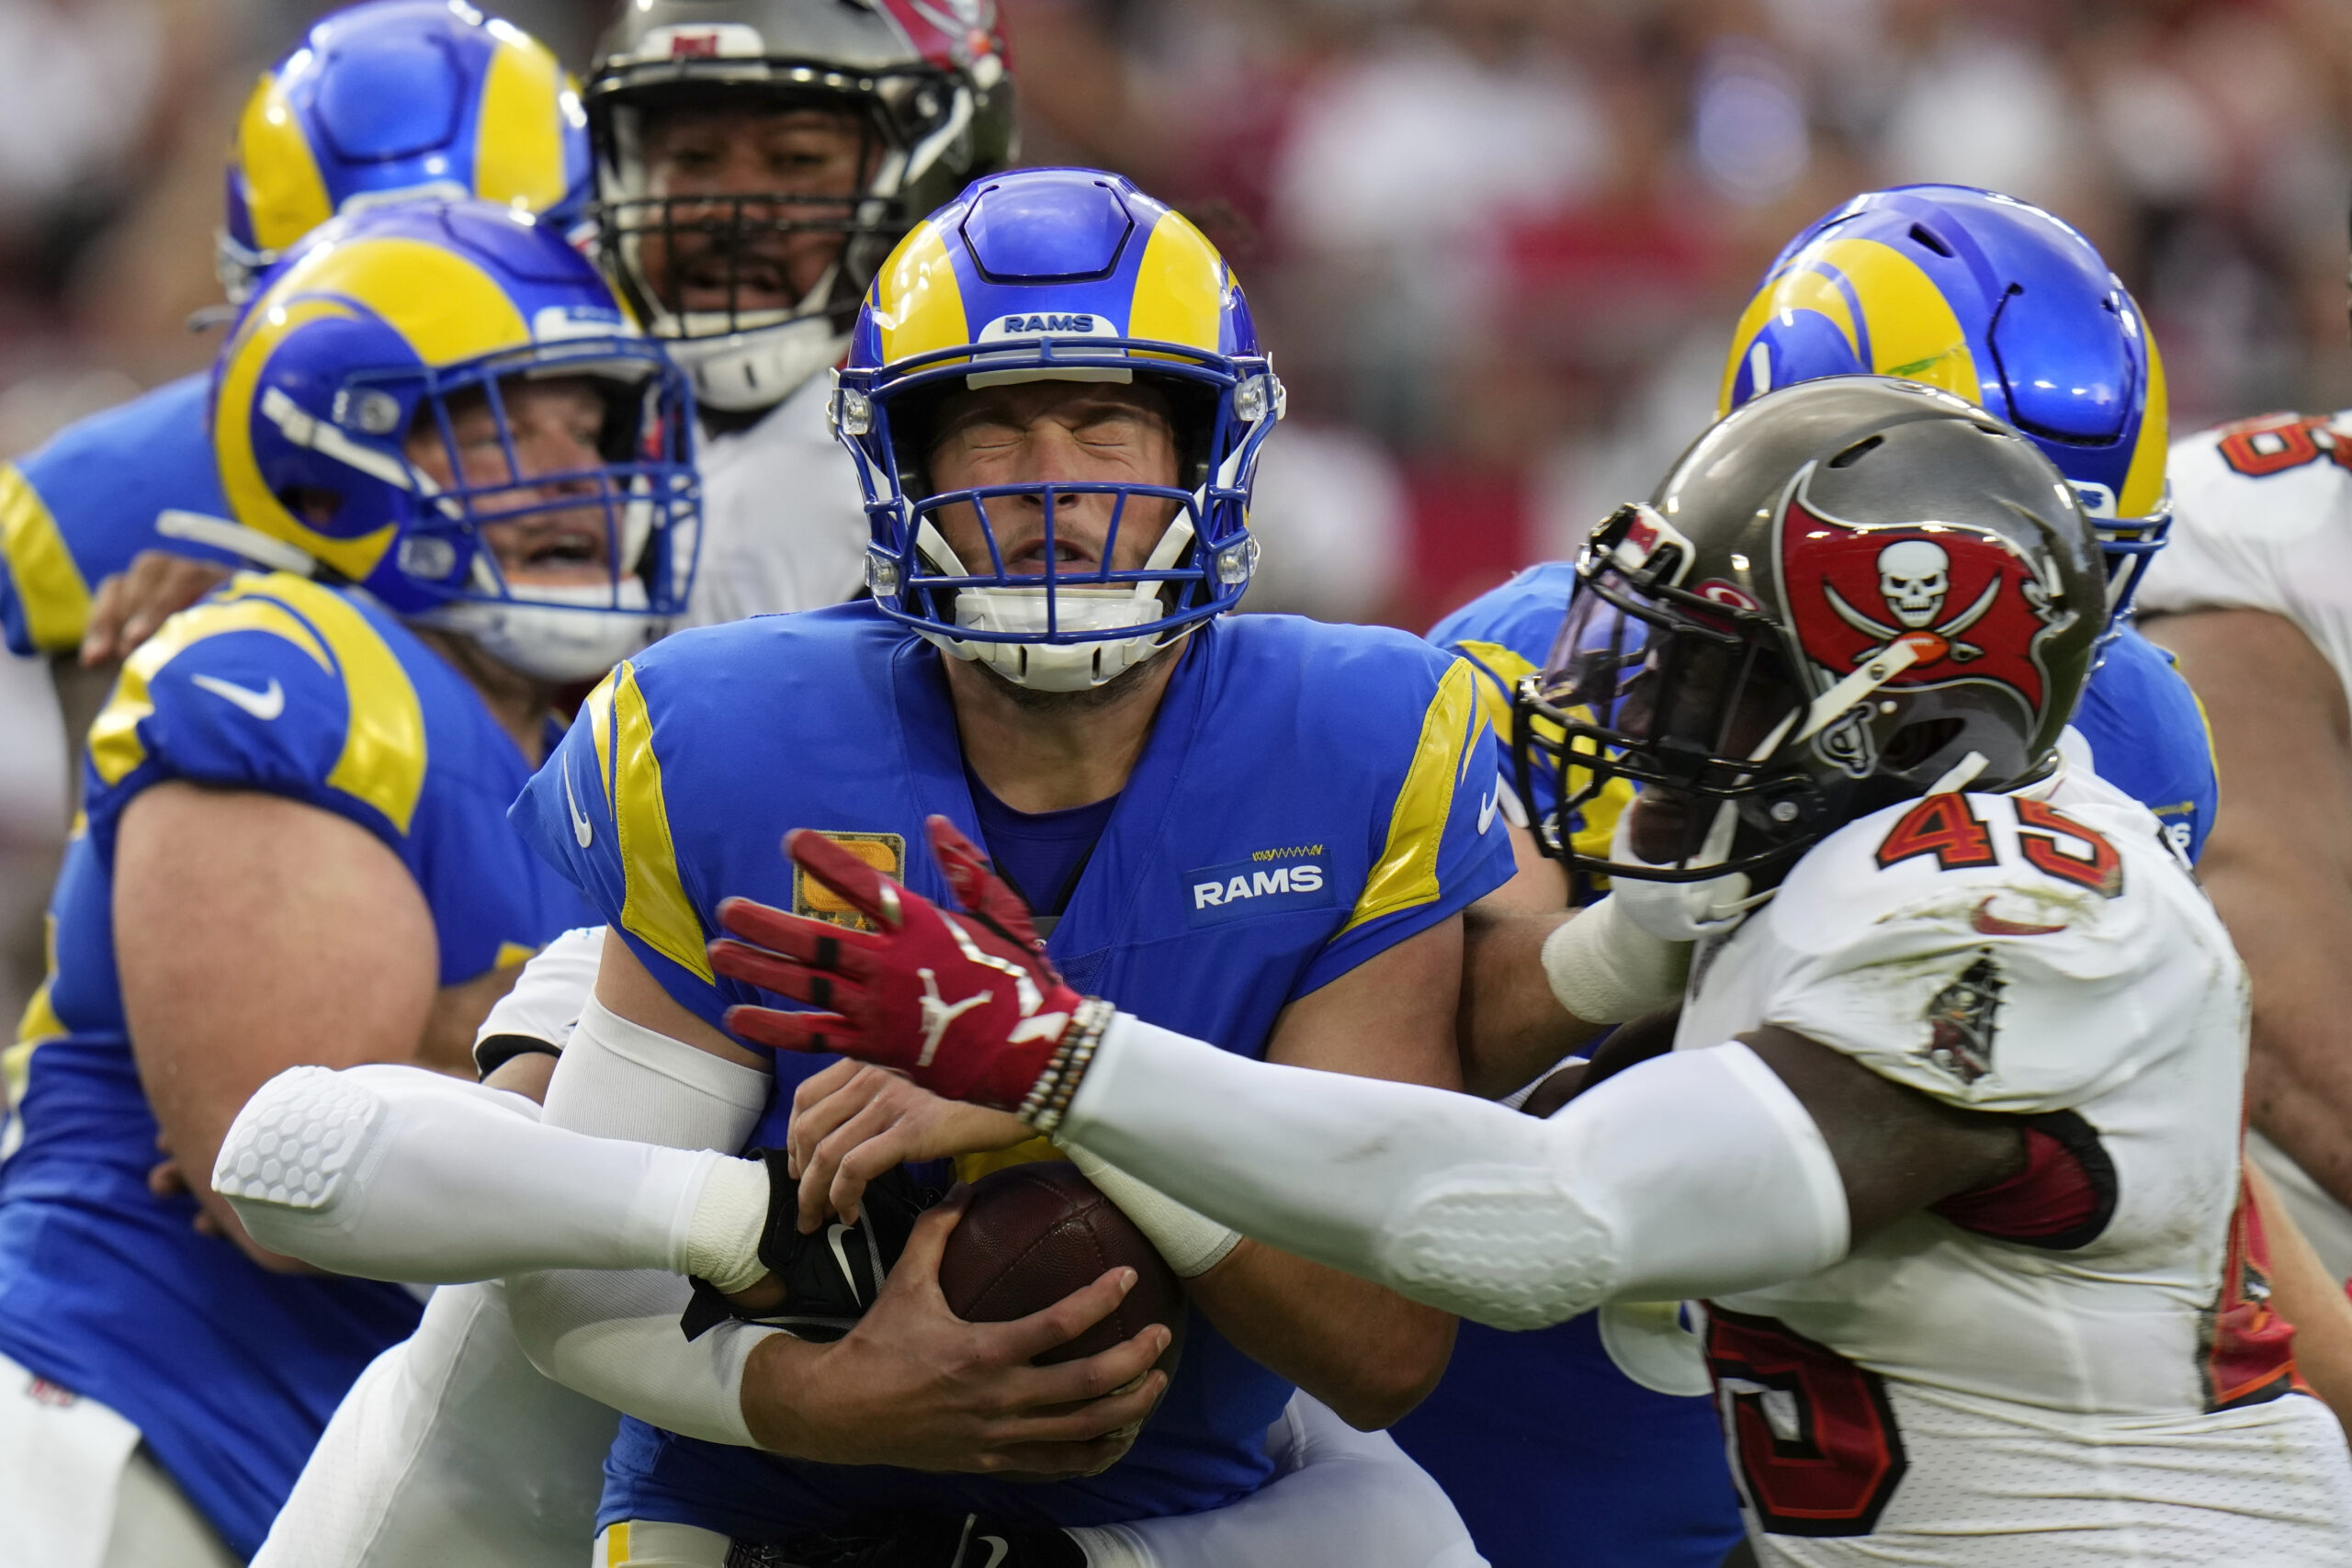 Los Angeles Rams quarterback Matthew Stafford (9) is sacked by Tampa Bay Buccaneers linebacker Devin White (45) during the first half of an NFL football game between the Los Angeles Rams and Tampa Bay Buccaneers, Sunday, Nov. 6, 2022, in Tampa, Fla. (AP Photo/Chris O'Meara)